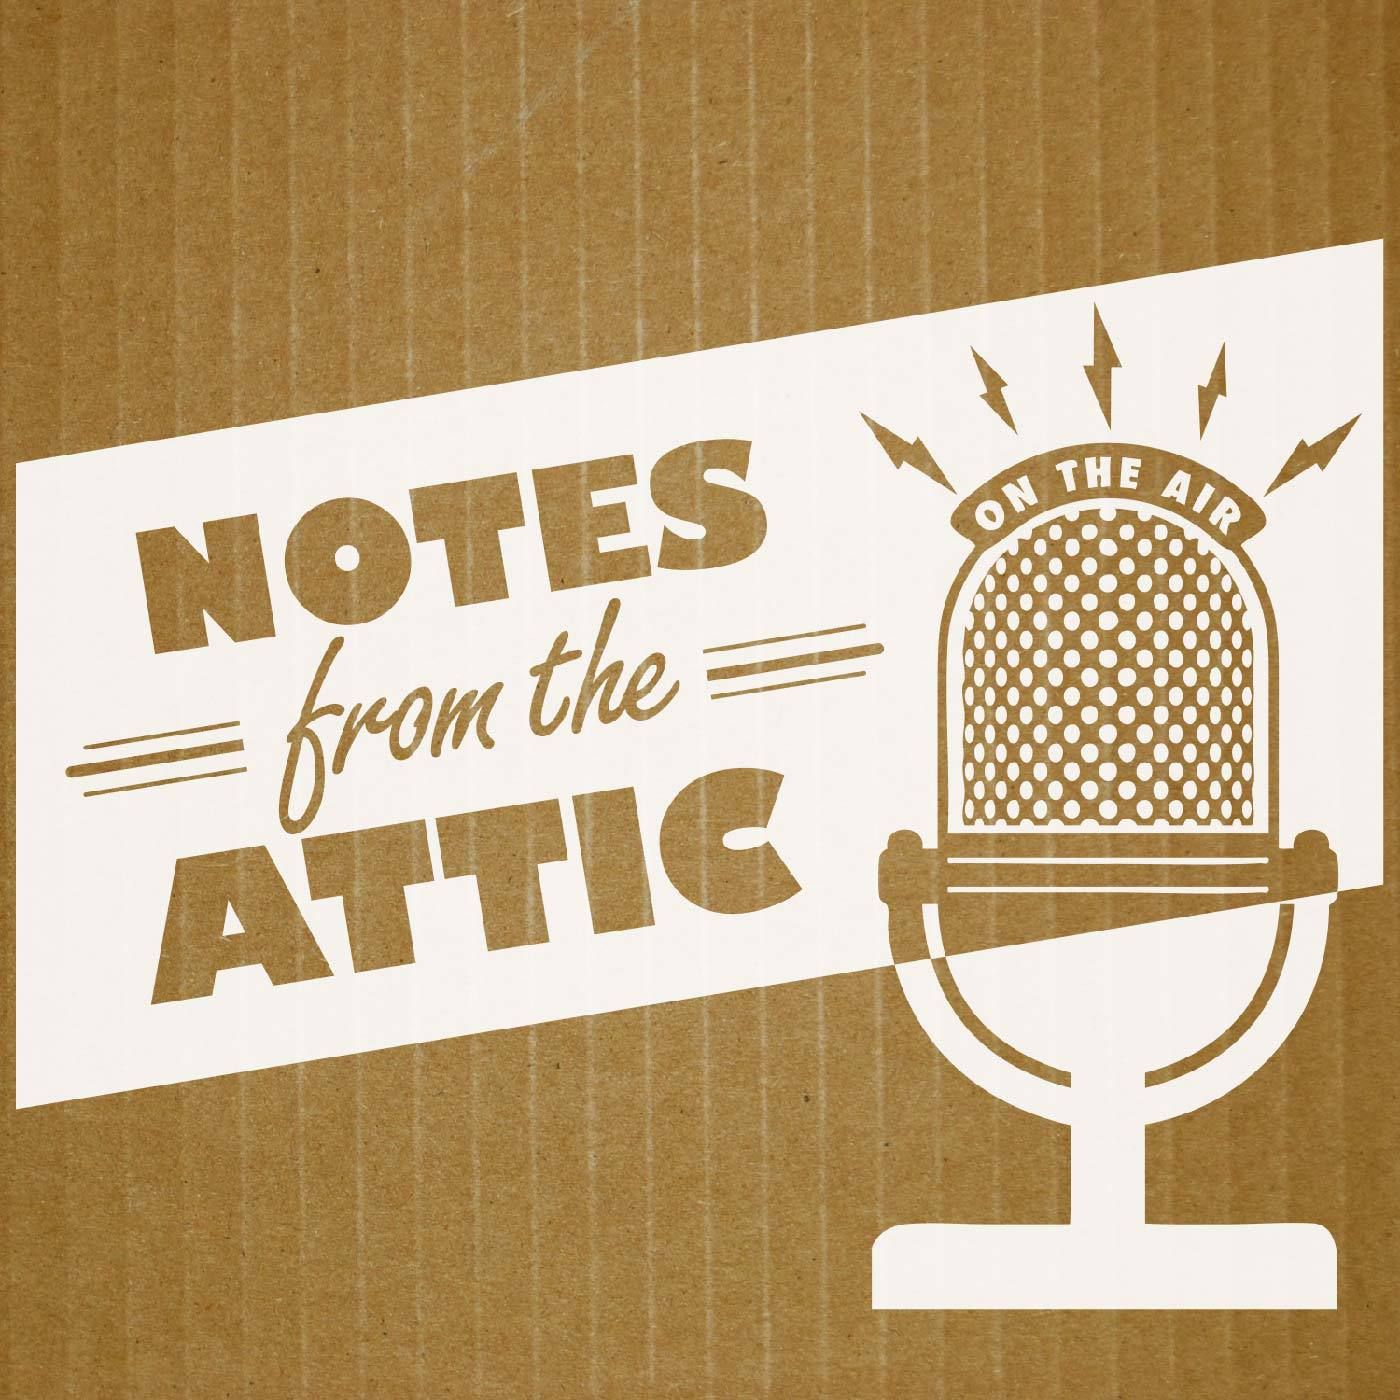 Notes from the Attic